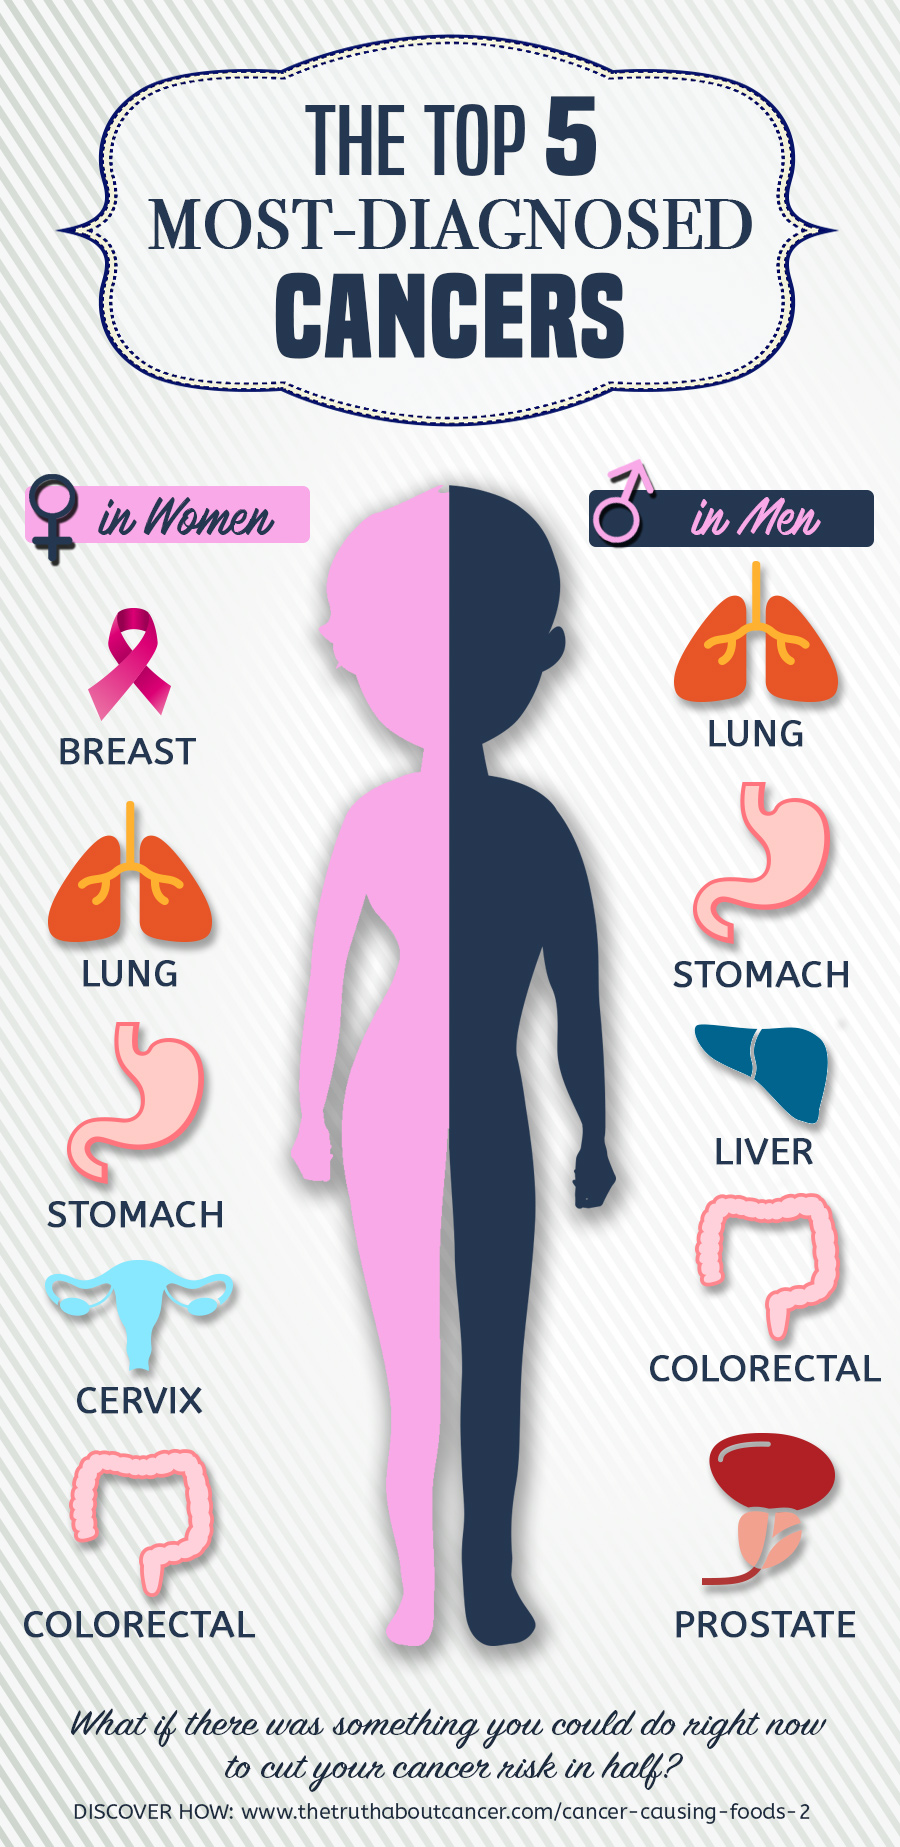 The top 5 most-diagnosed cancers in men and women.